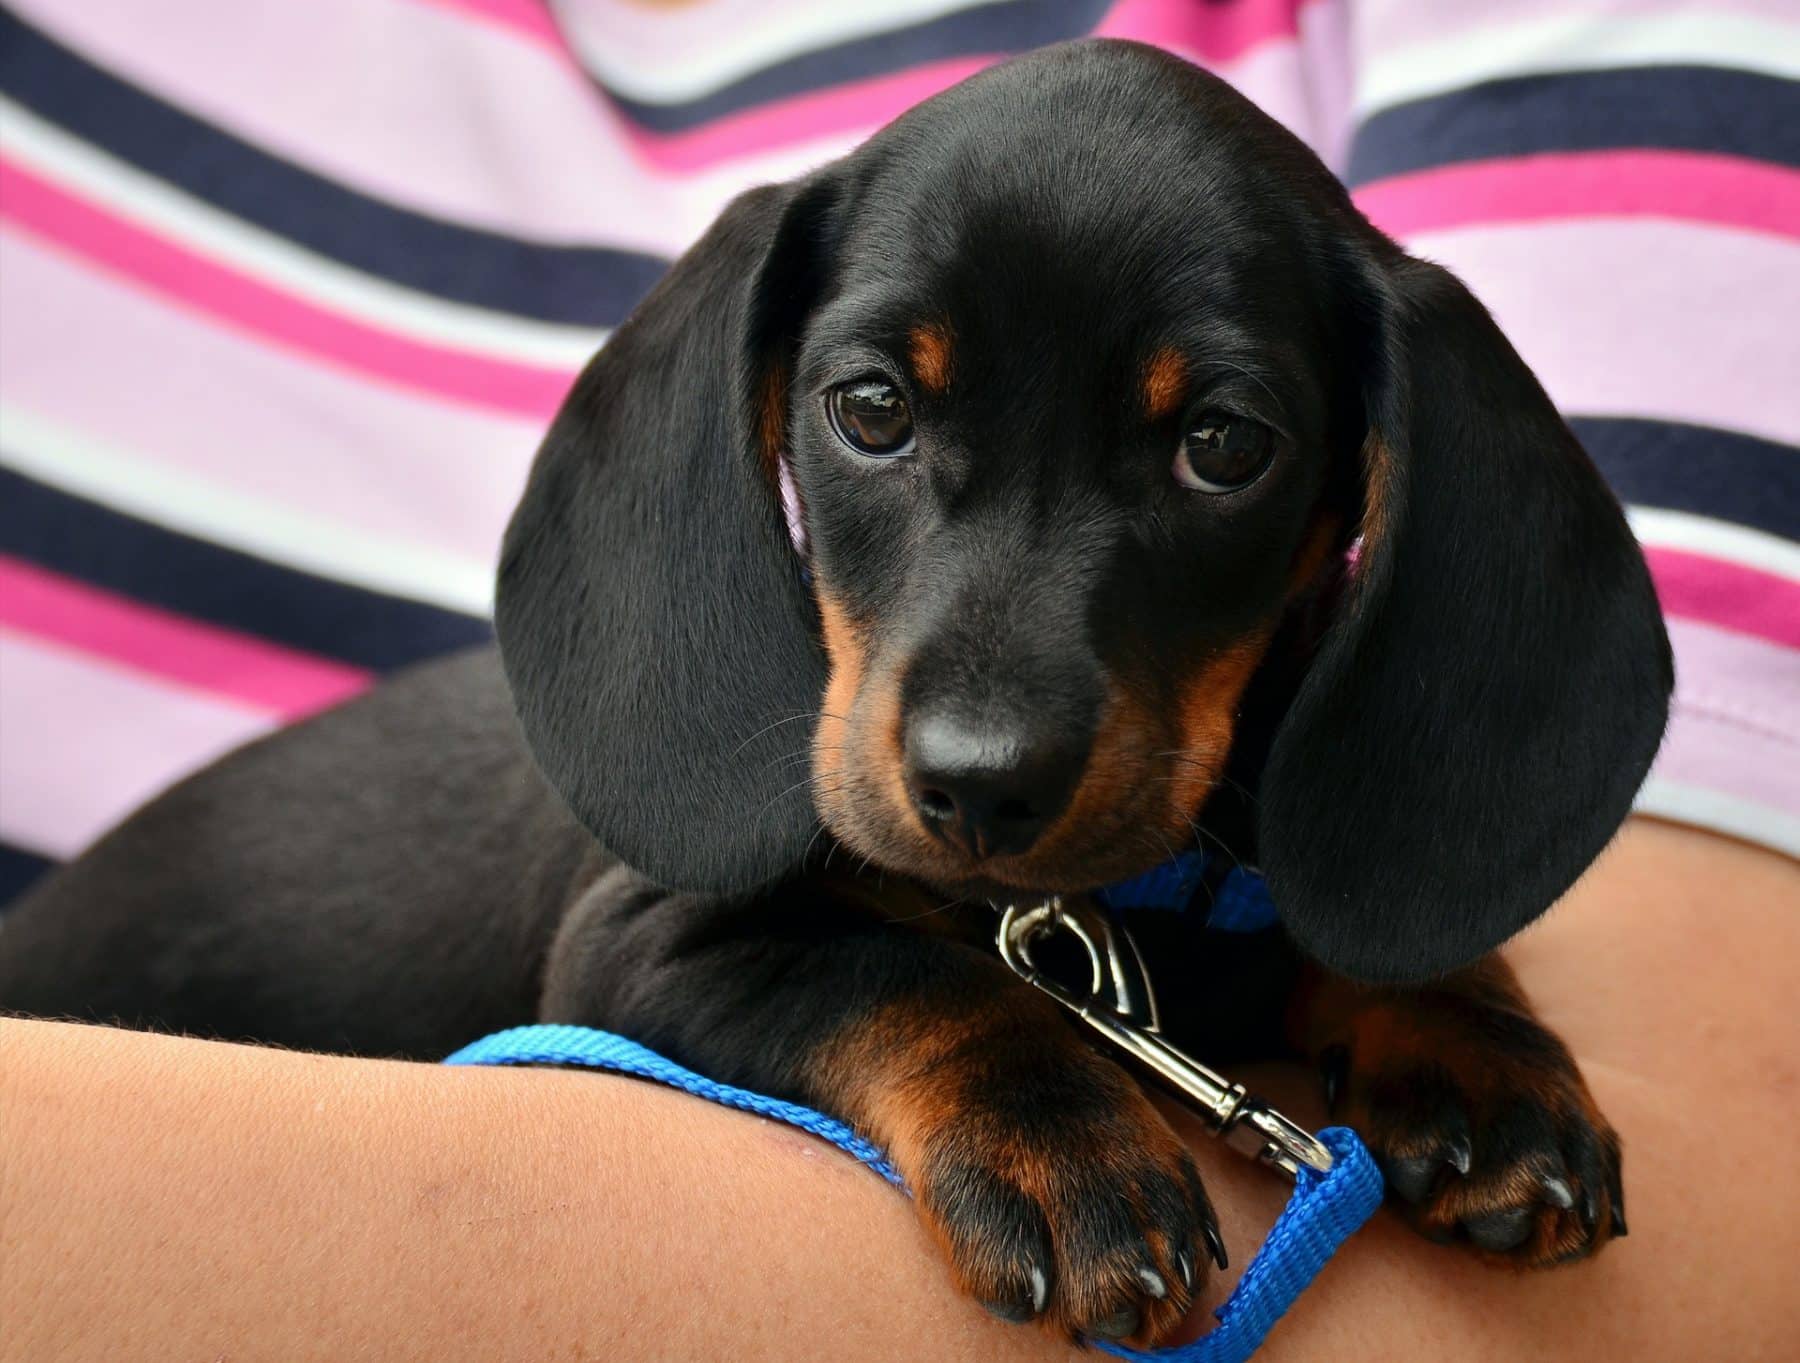 Dachshund Puppies | Dachshund Puppy Facts and How to Get a Puppy